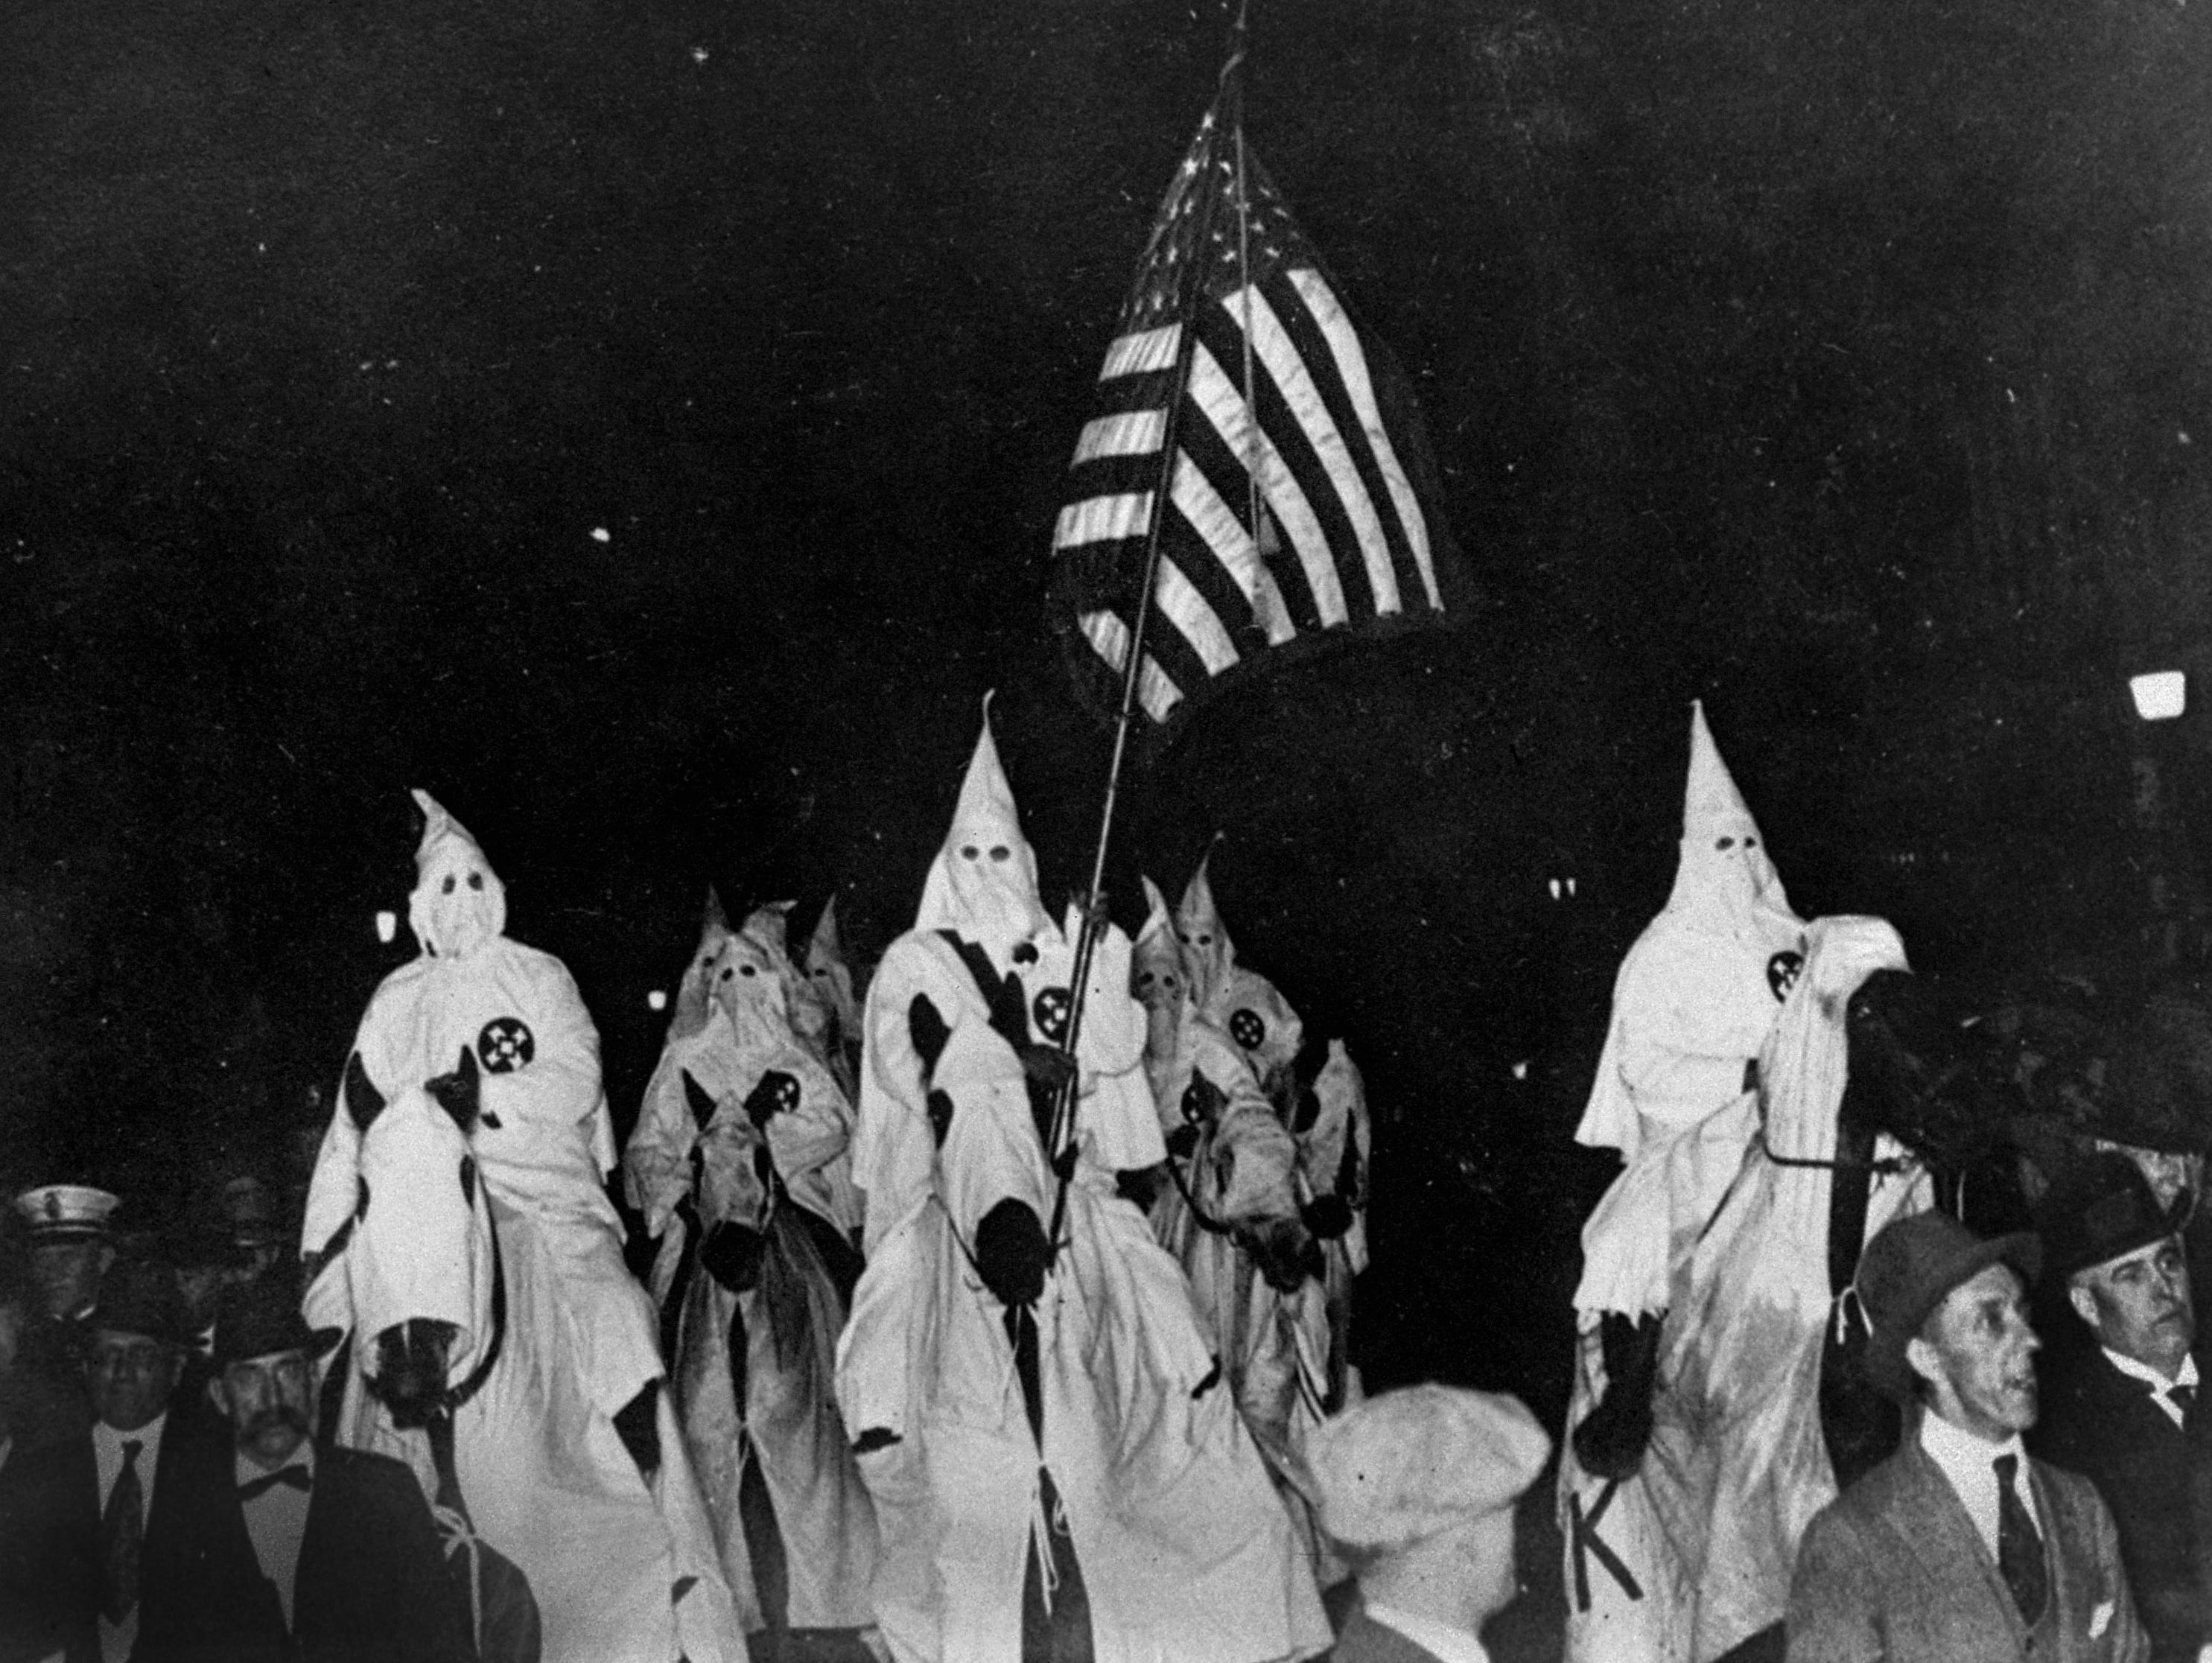 In this 1923 photo, members of the Ku Klux Klan ride horses during a parade through the streets of Tulsa, Okla.